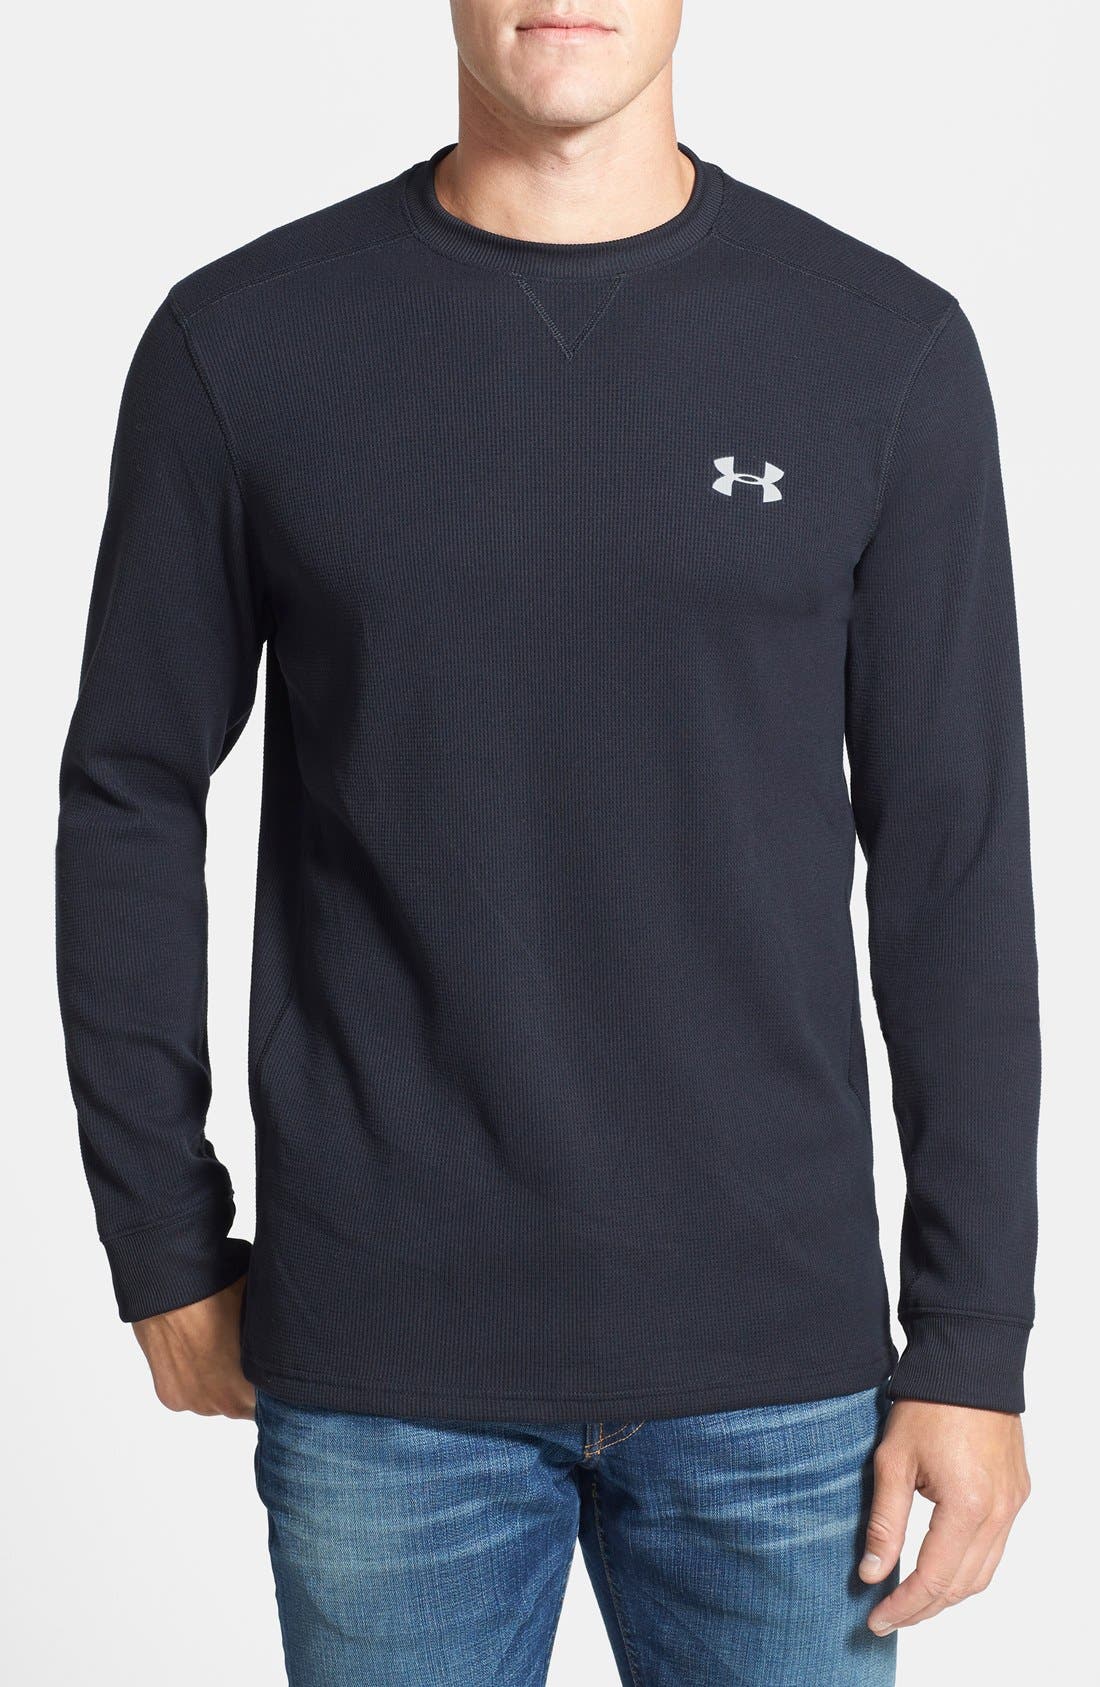 under armour long sleeve thermal shirt